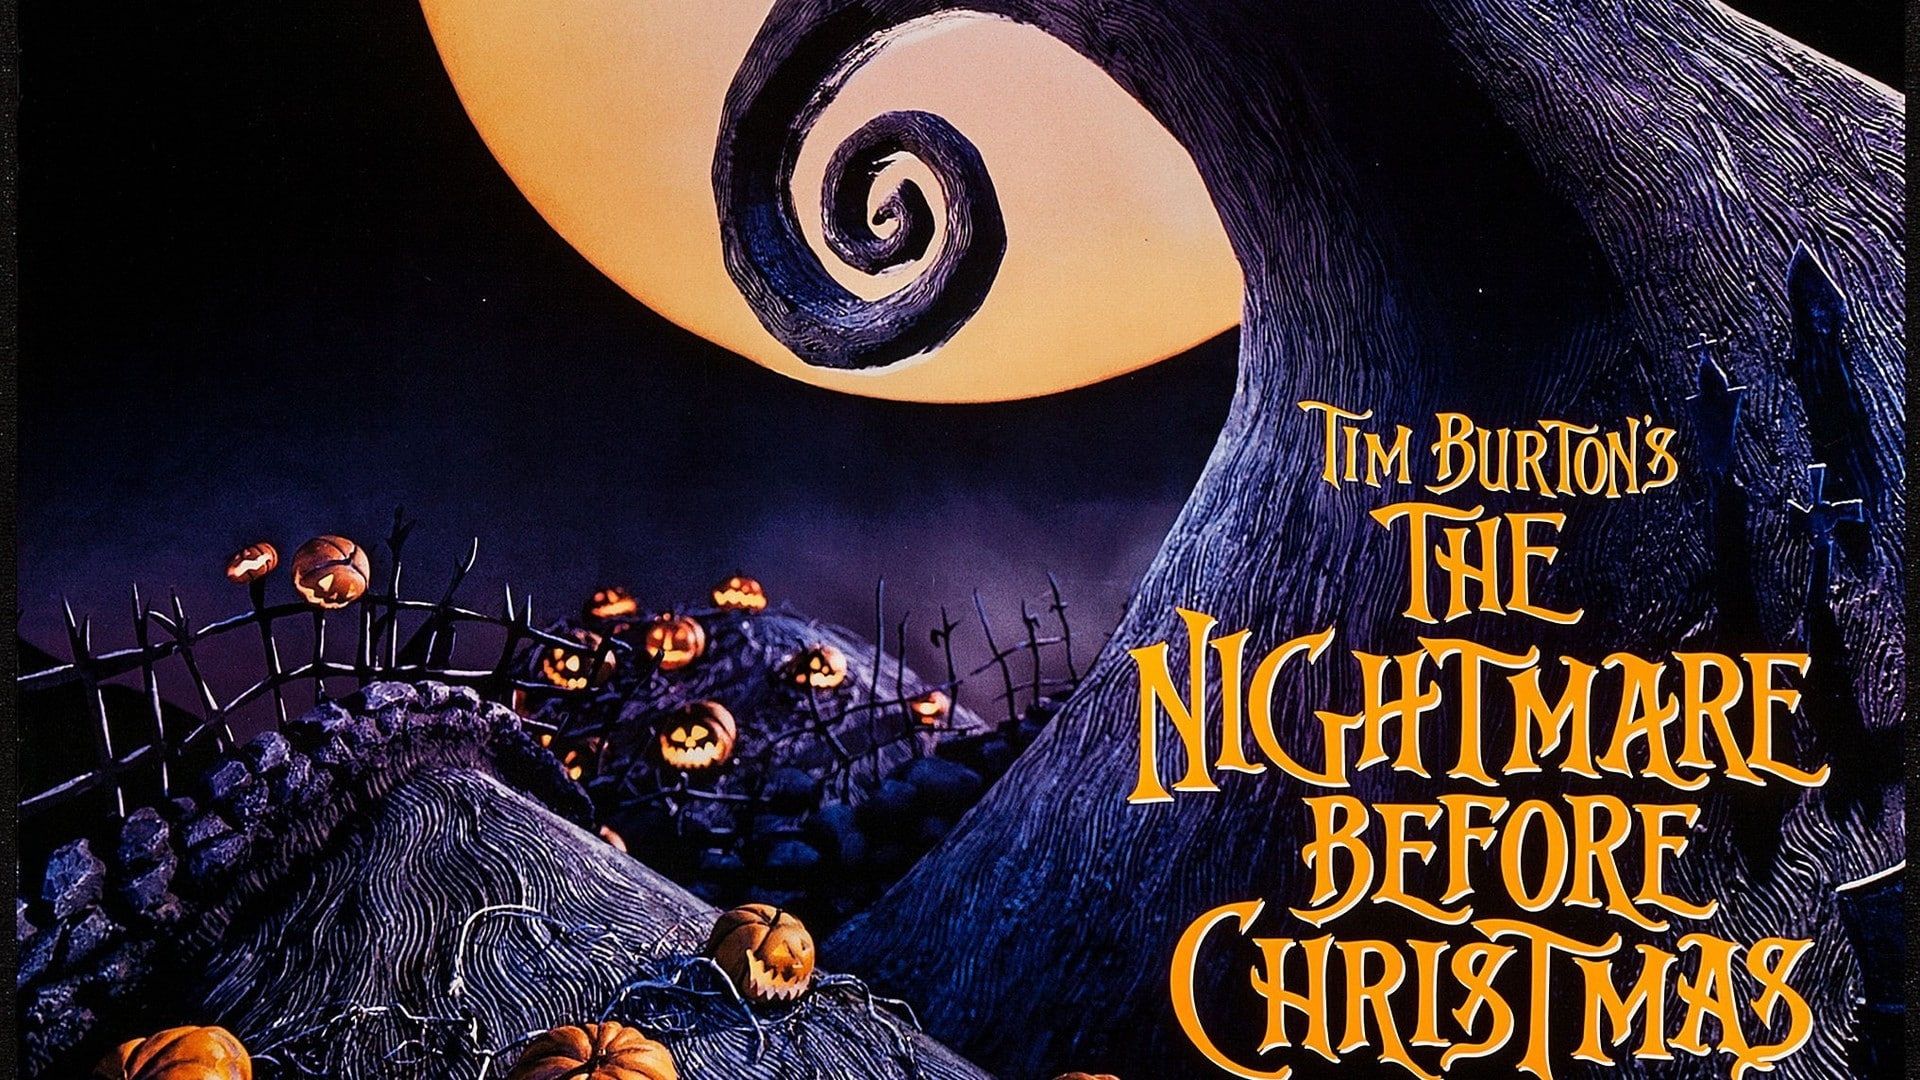 Free Download Hd Wallpaper The Nightmare Before Christmas Tim